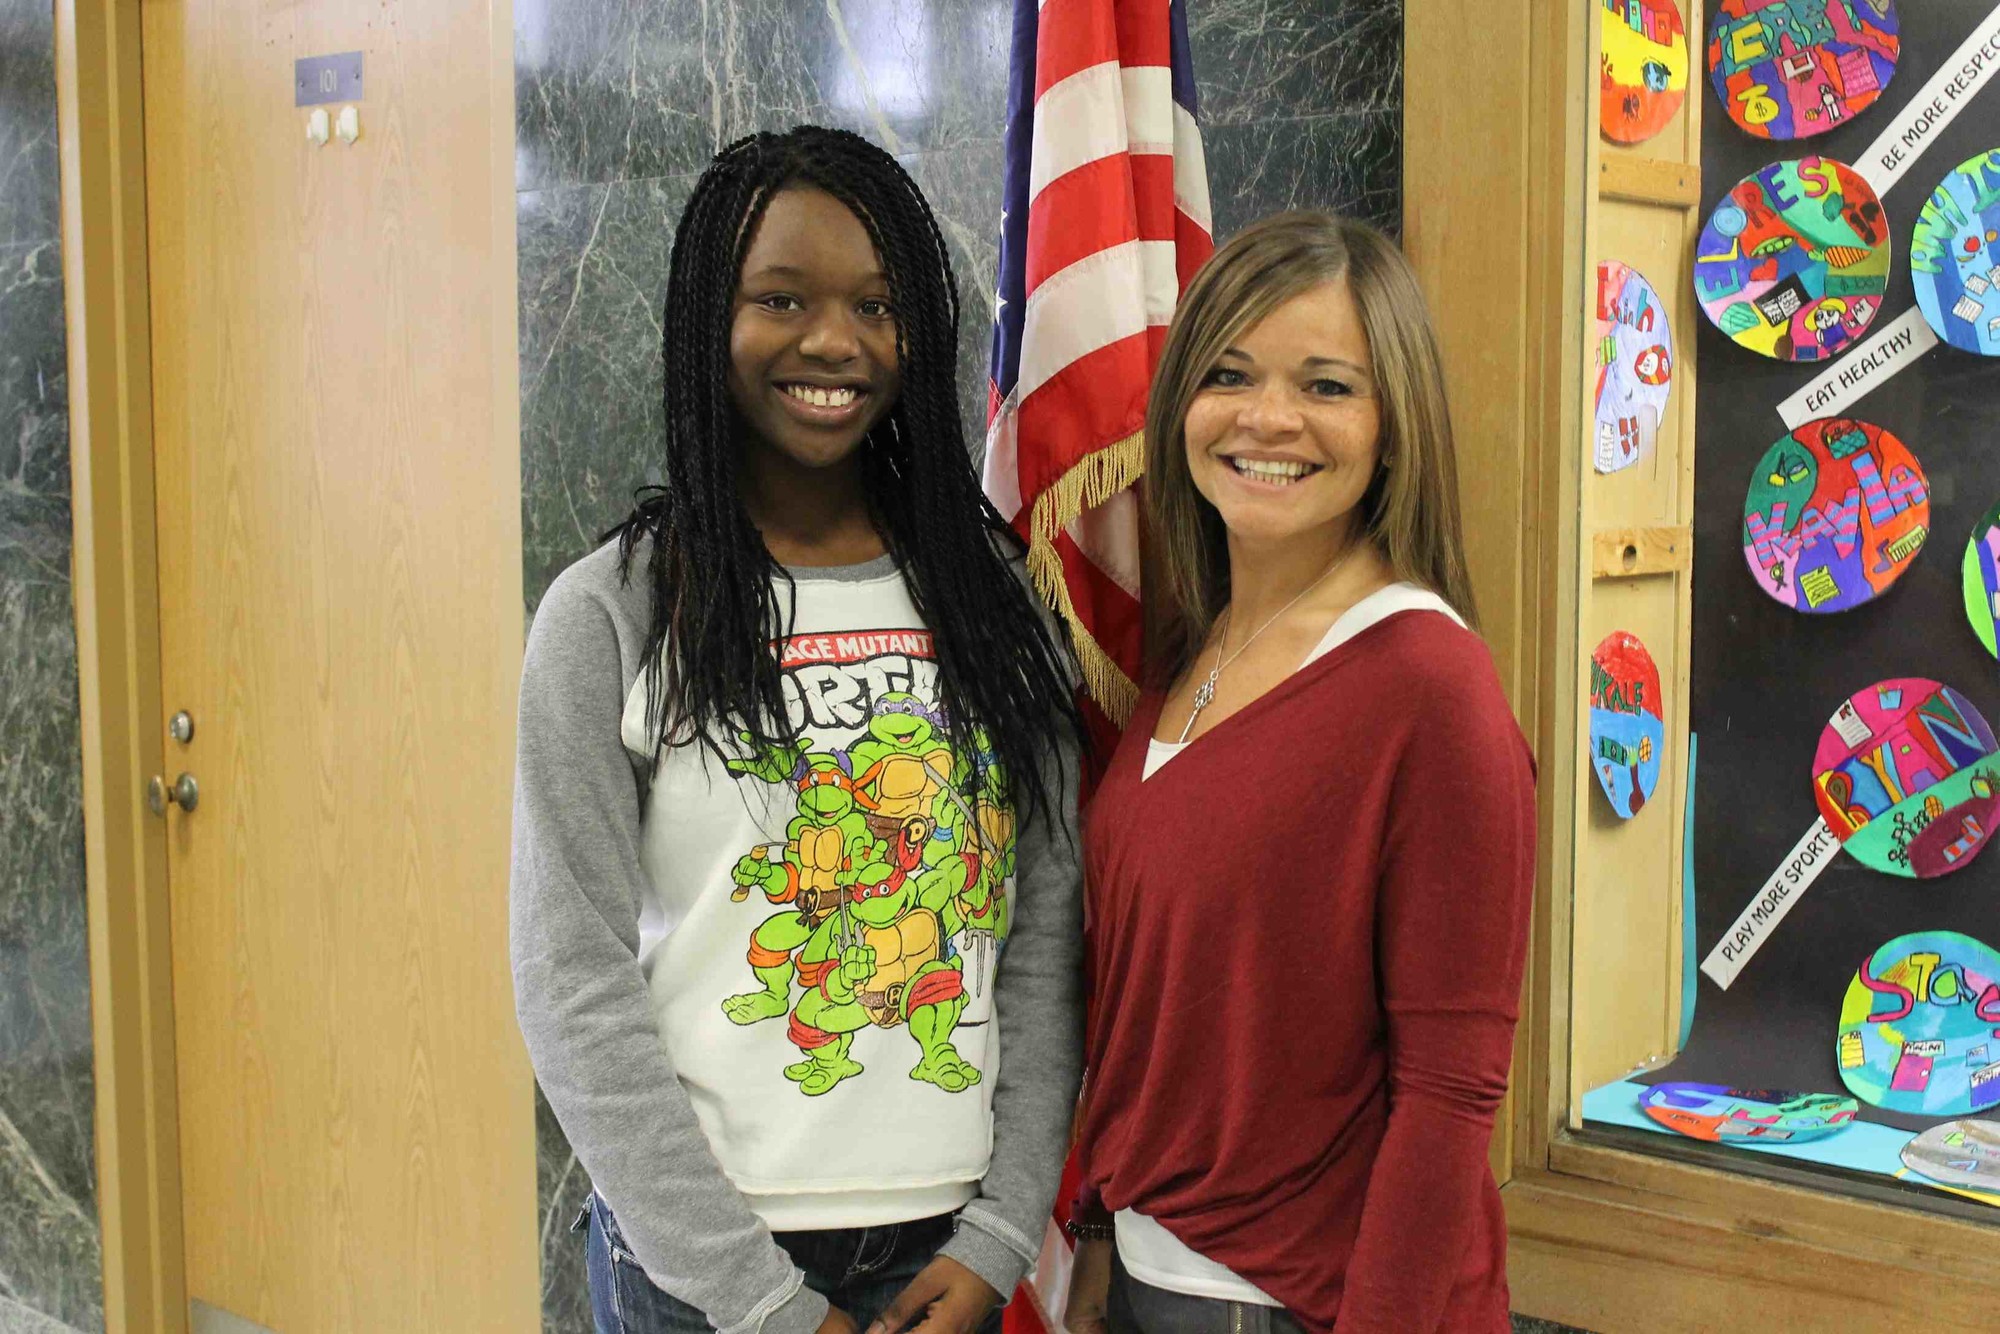 Ogo Chukwuma will compete in the Feb. 27 competition at Farmingdale State College. She is pictured with teacher Kim Cazzetto, who coordinated the school event.